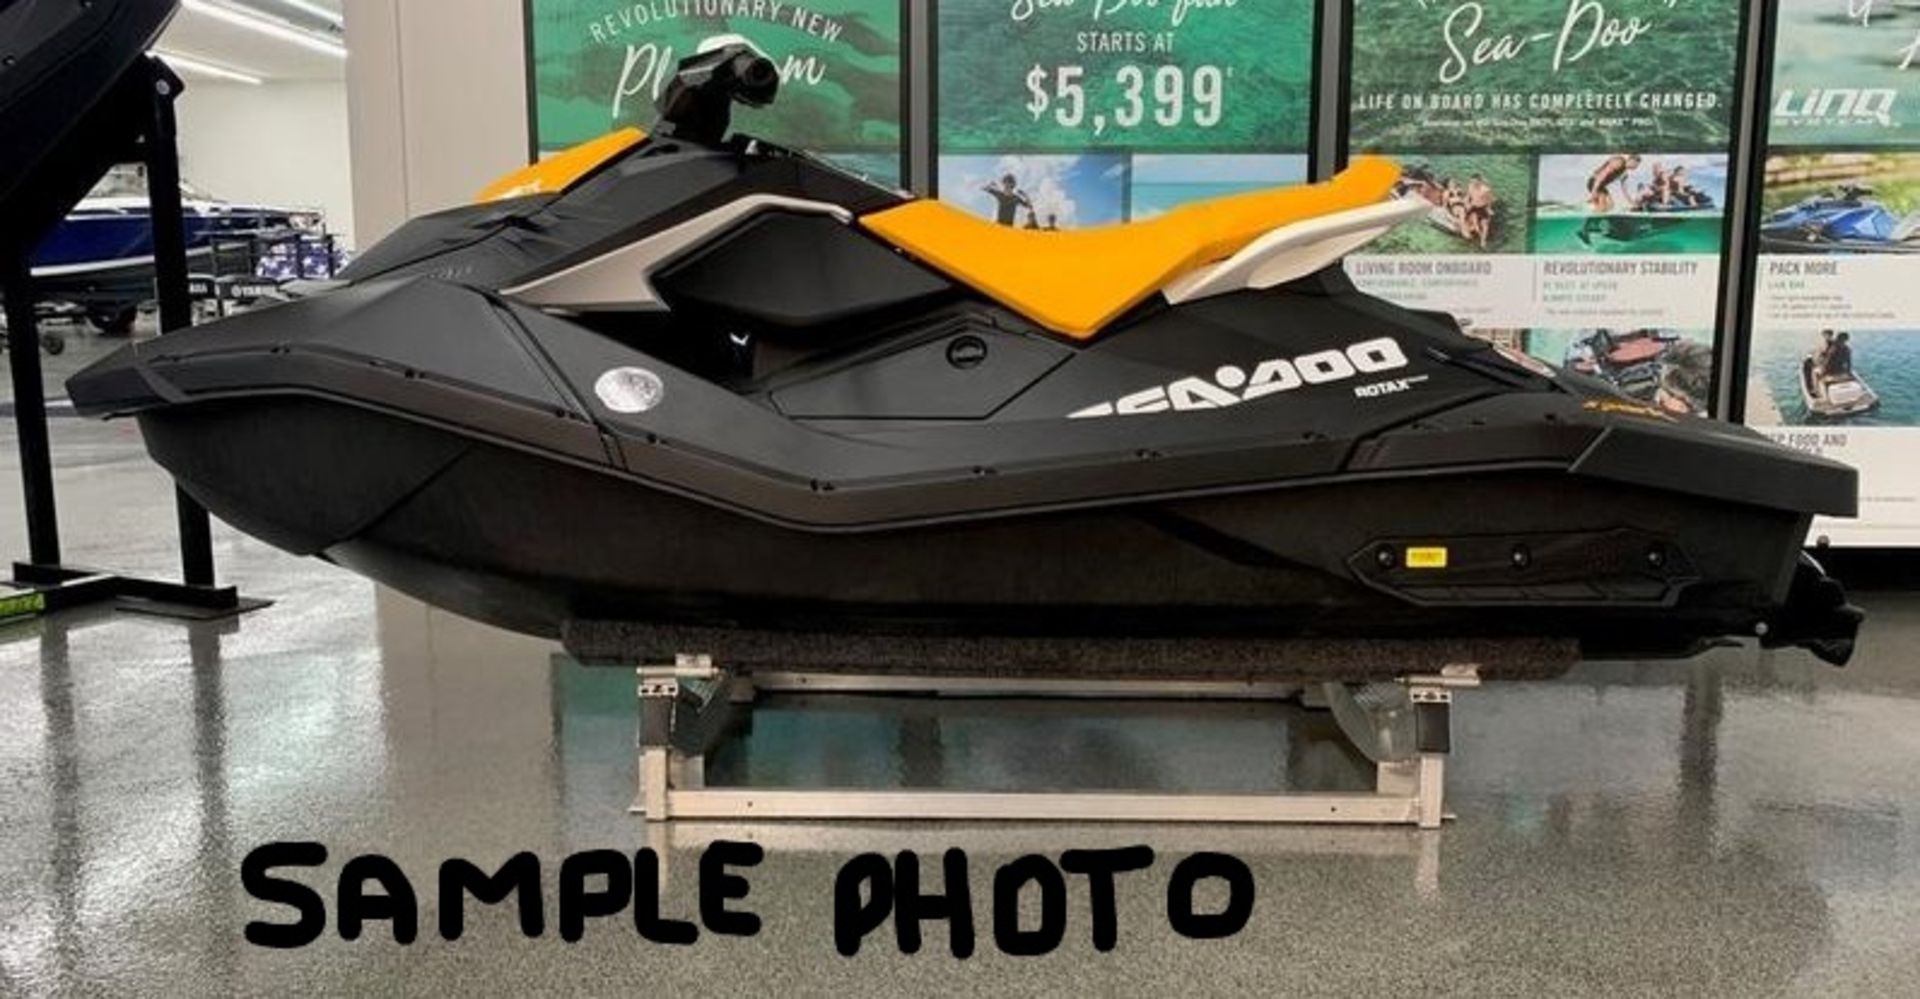 A BRP SeaDoo Spark 2 up 900h Jet Ski, black, VIN No.YDV55335B121 (new, in packing crate).